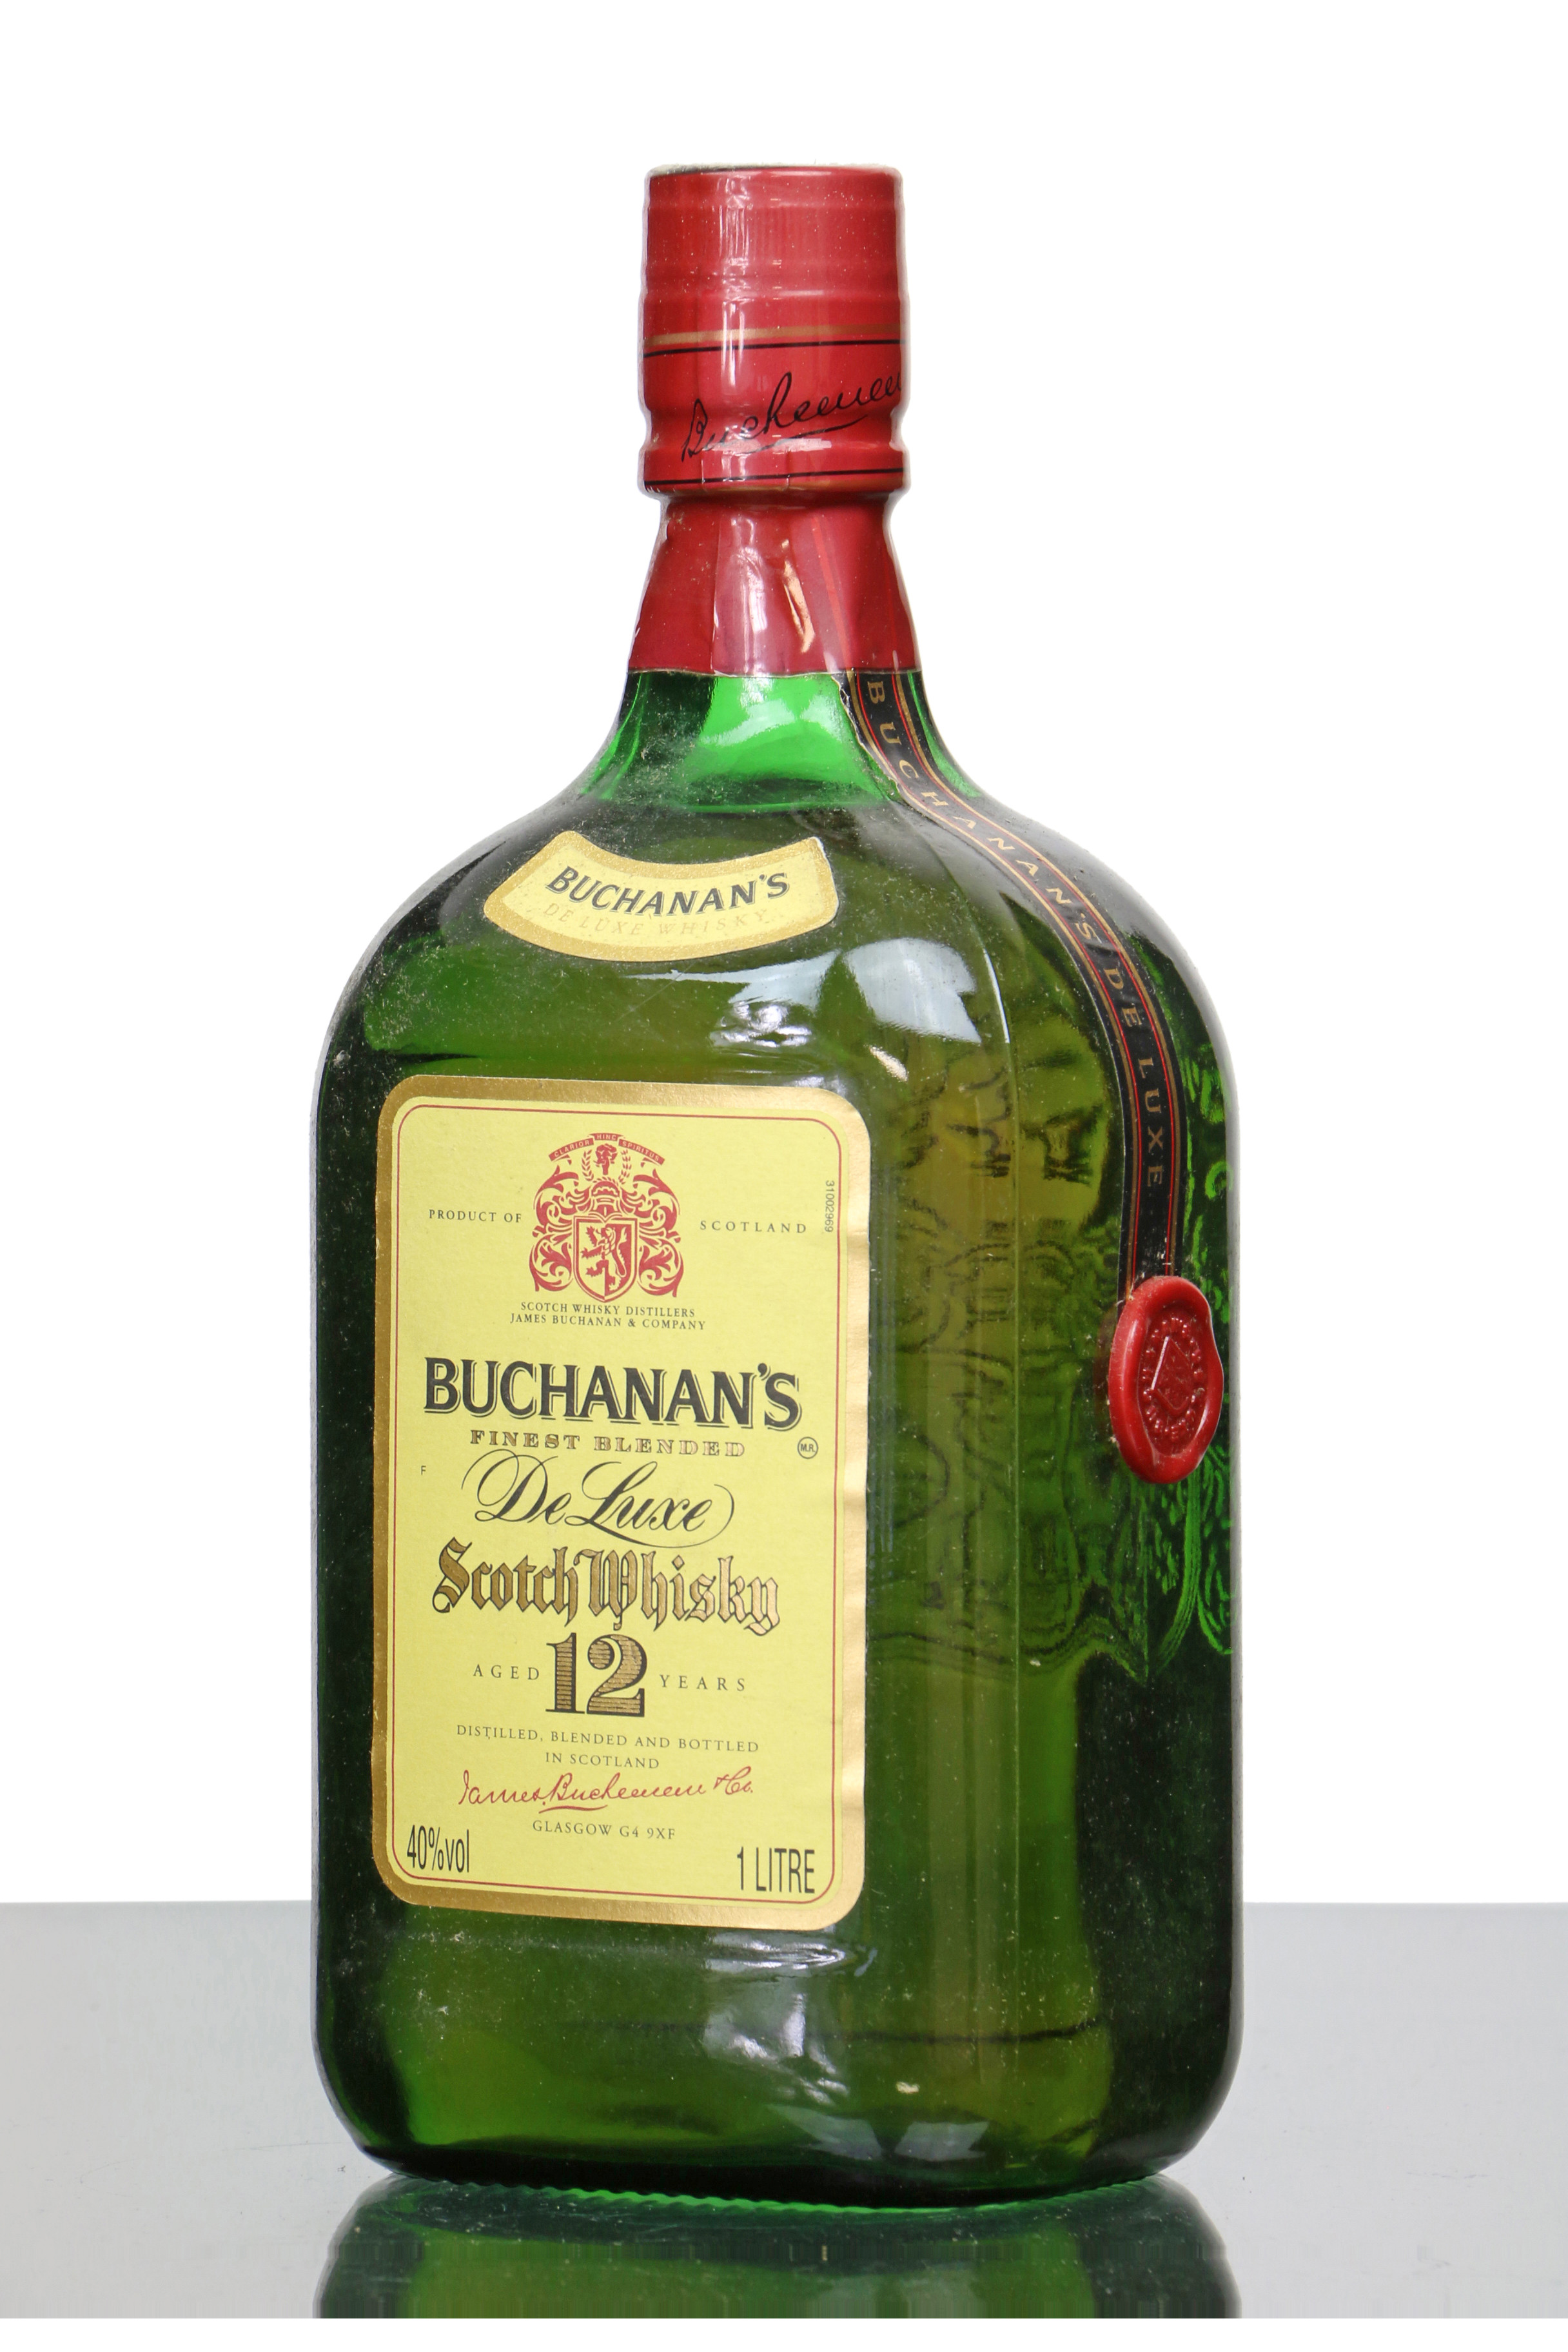 Buchanan's 1 Liter Price - How do you Price a Switches?